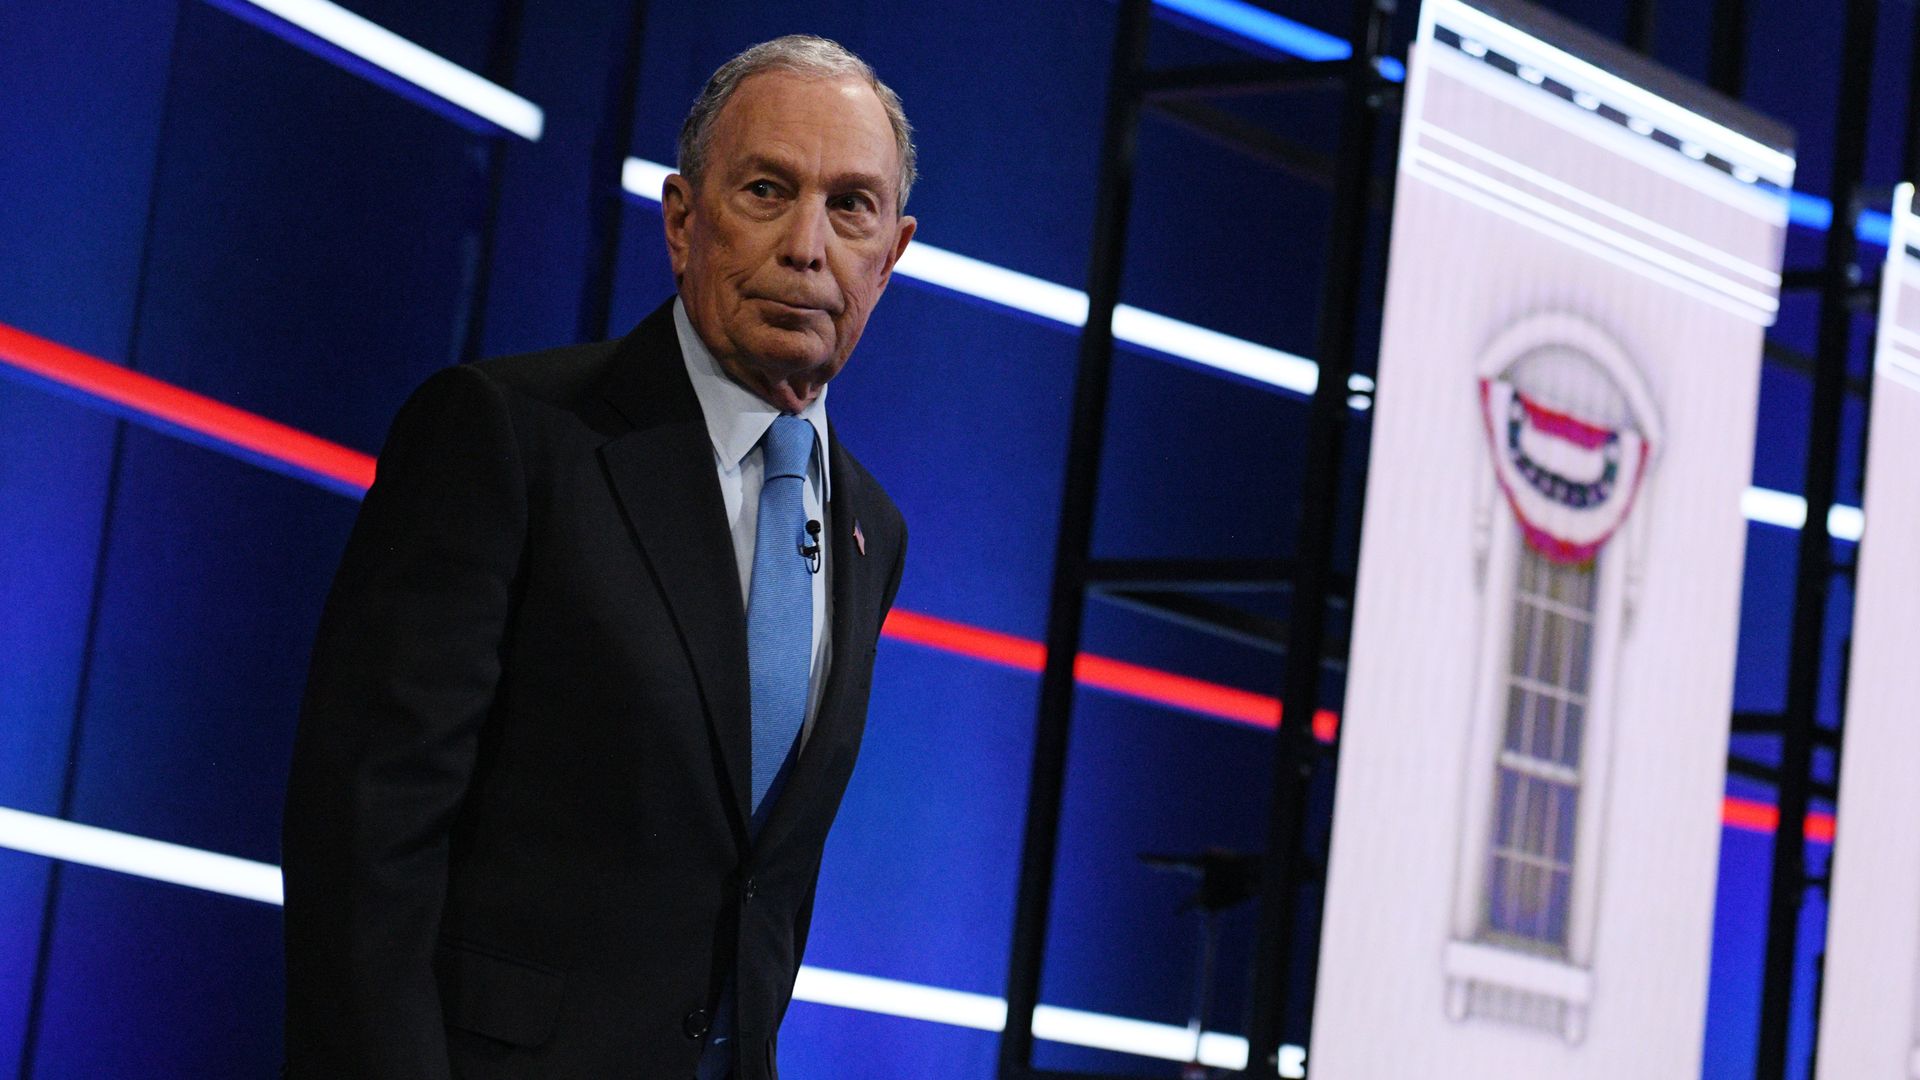 In this image, Bloomberg stands on the debate stage in a suit 